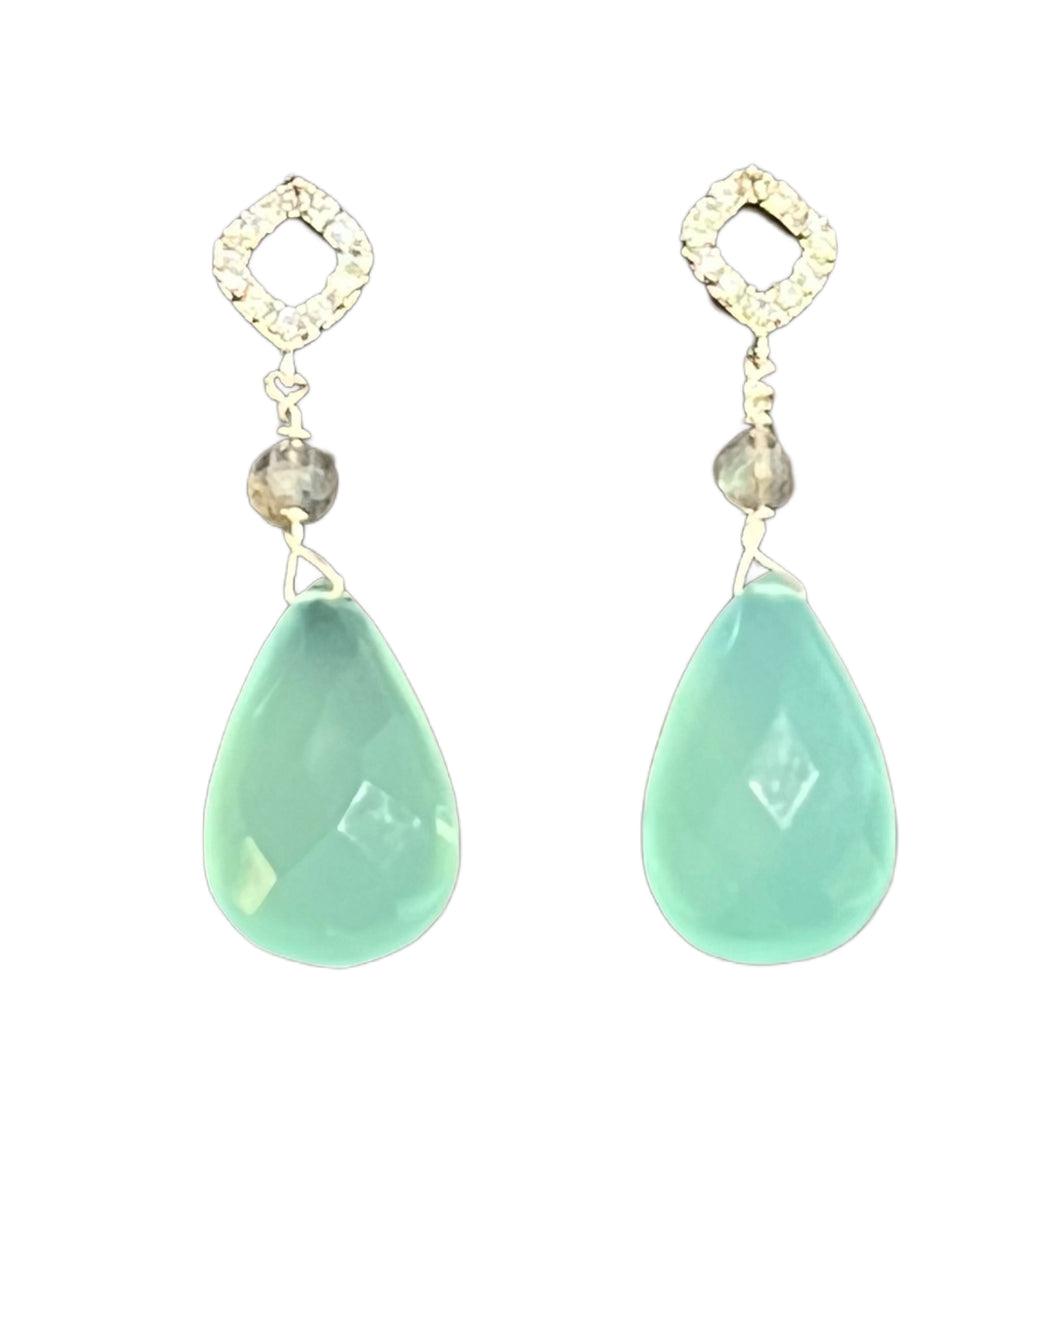 Chalcedony Briolle Earrings with CZ Pave Posts